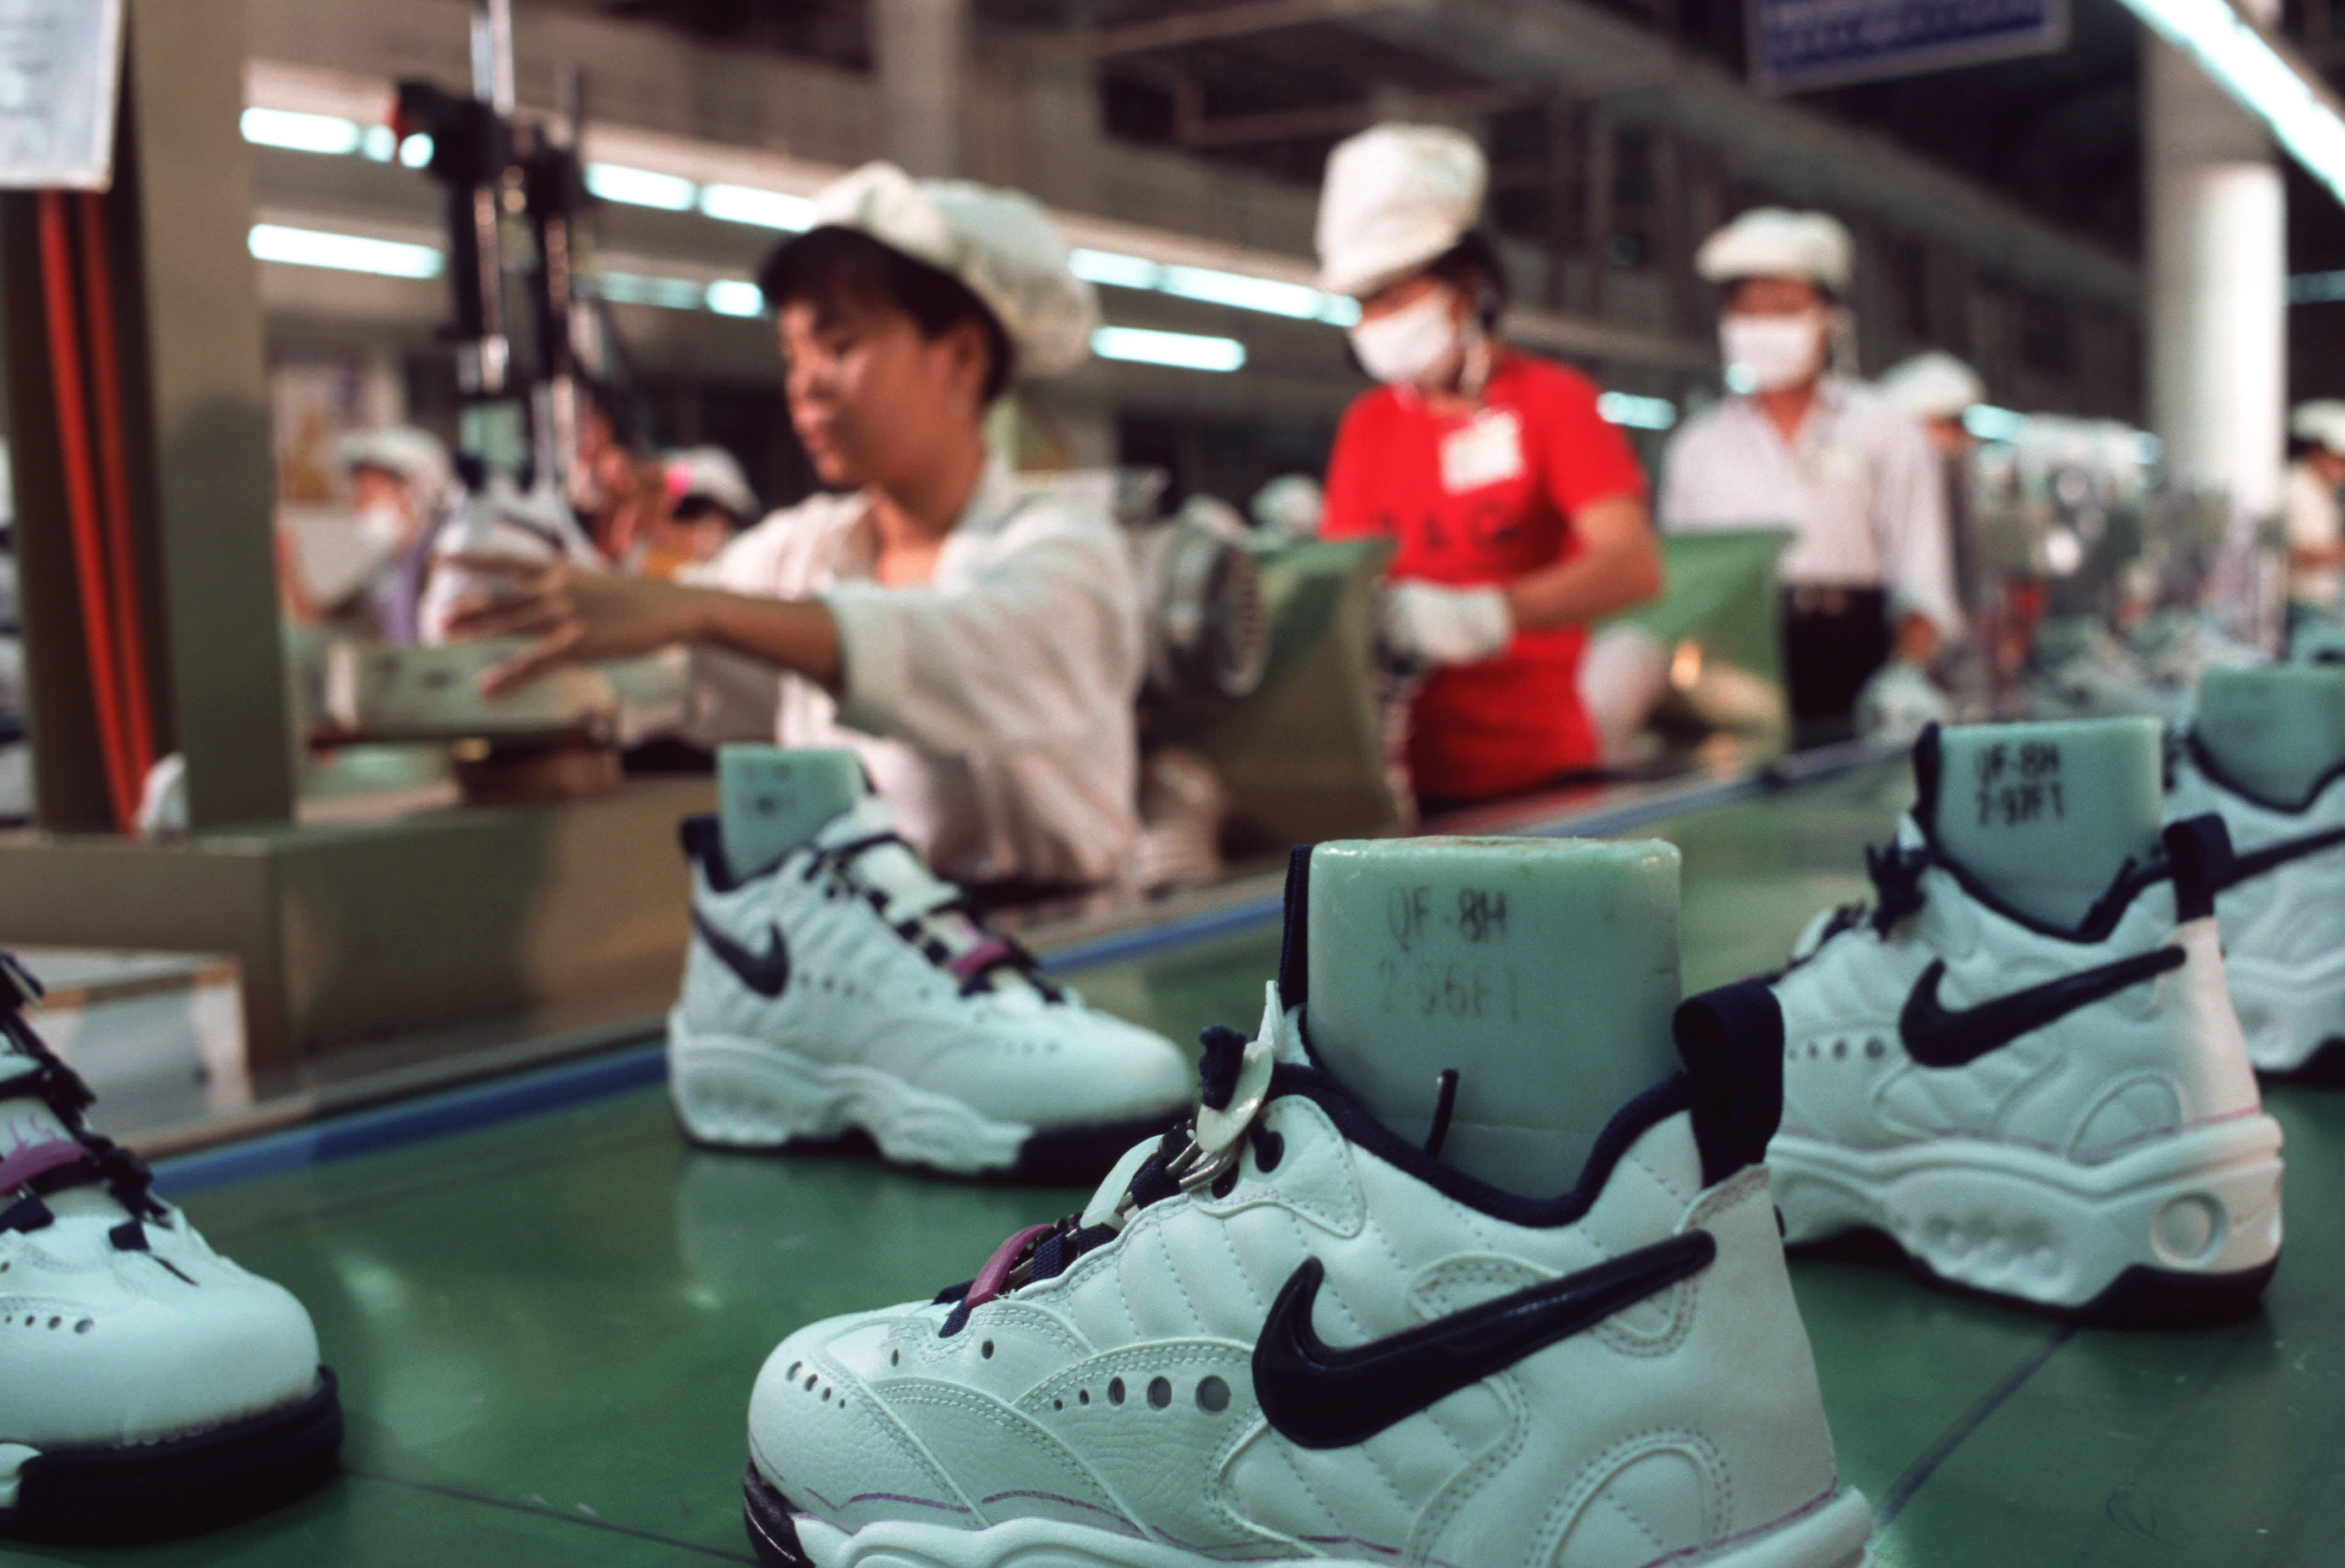 Empleador Probar Percibir Nike could run out of shoes from Vietnam as Covid worsens: S&P Global